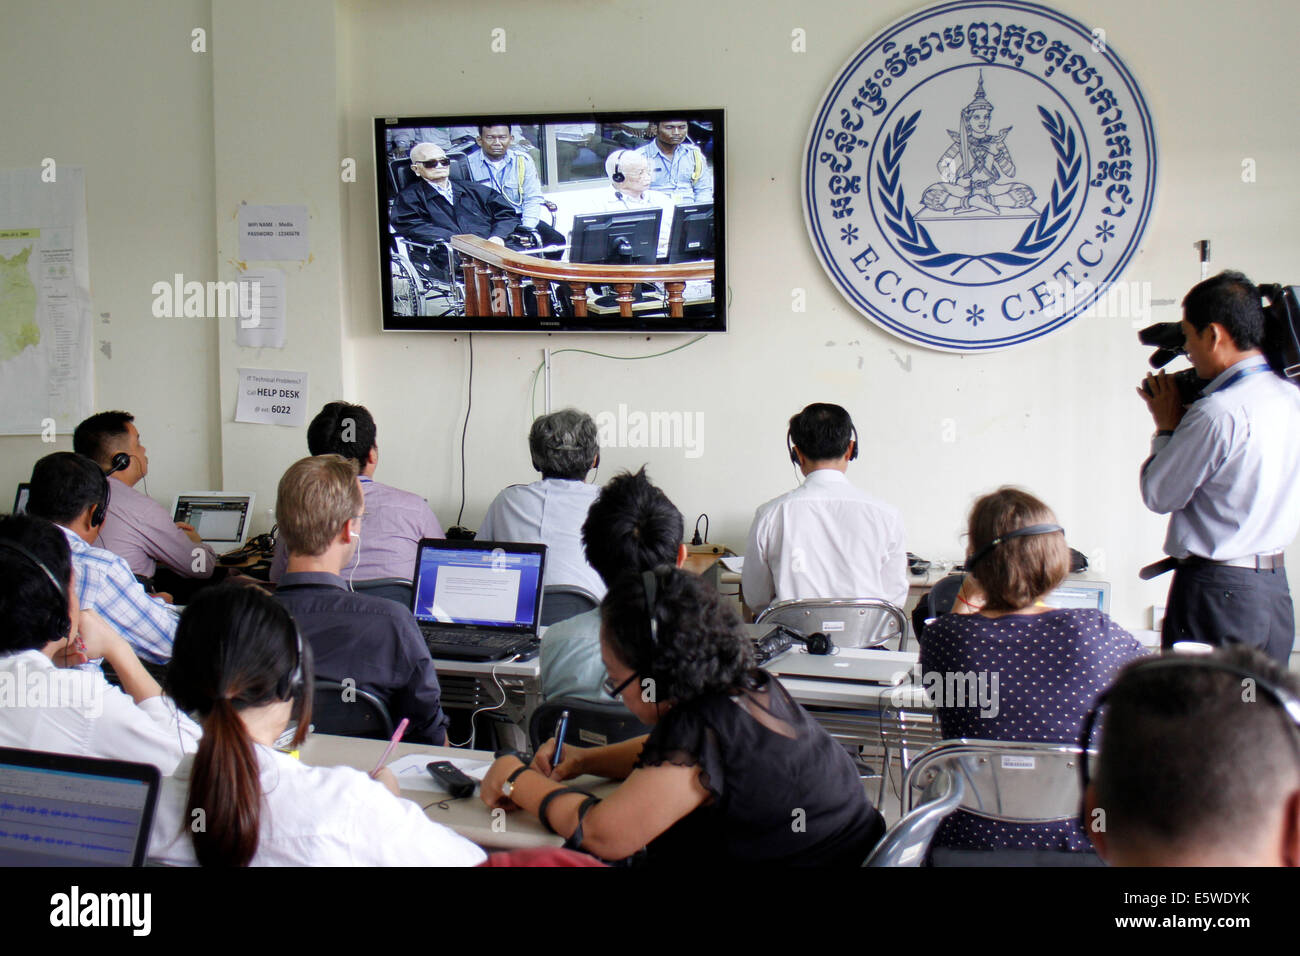 Phnom Penh, Cambodia. 7th Aug, 2014. Media members watch the pronouncement of judgment against two aging former top leaders of the Democratic Kampuchea in Phnom Penh, Cambodia, Aug. 7, 2014. The United Nations war crimes tribunal convicted two aging former top leaders of the Democratic Kampuchea, also known as Khmer Rouge, of atrocity crimes against humanity and sentenced them to life in prison, according to a verdict pronounced by the tribunal's president Nil Nonn on Thursday. Credit:  Sovannara/Xinhua/Alamy Live News Stock Photo